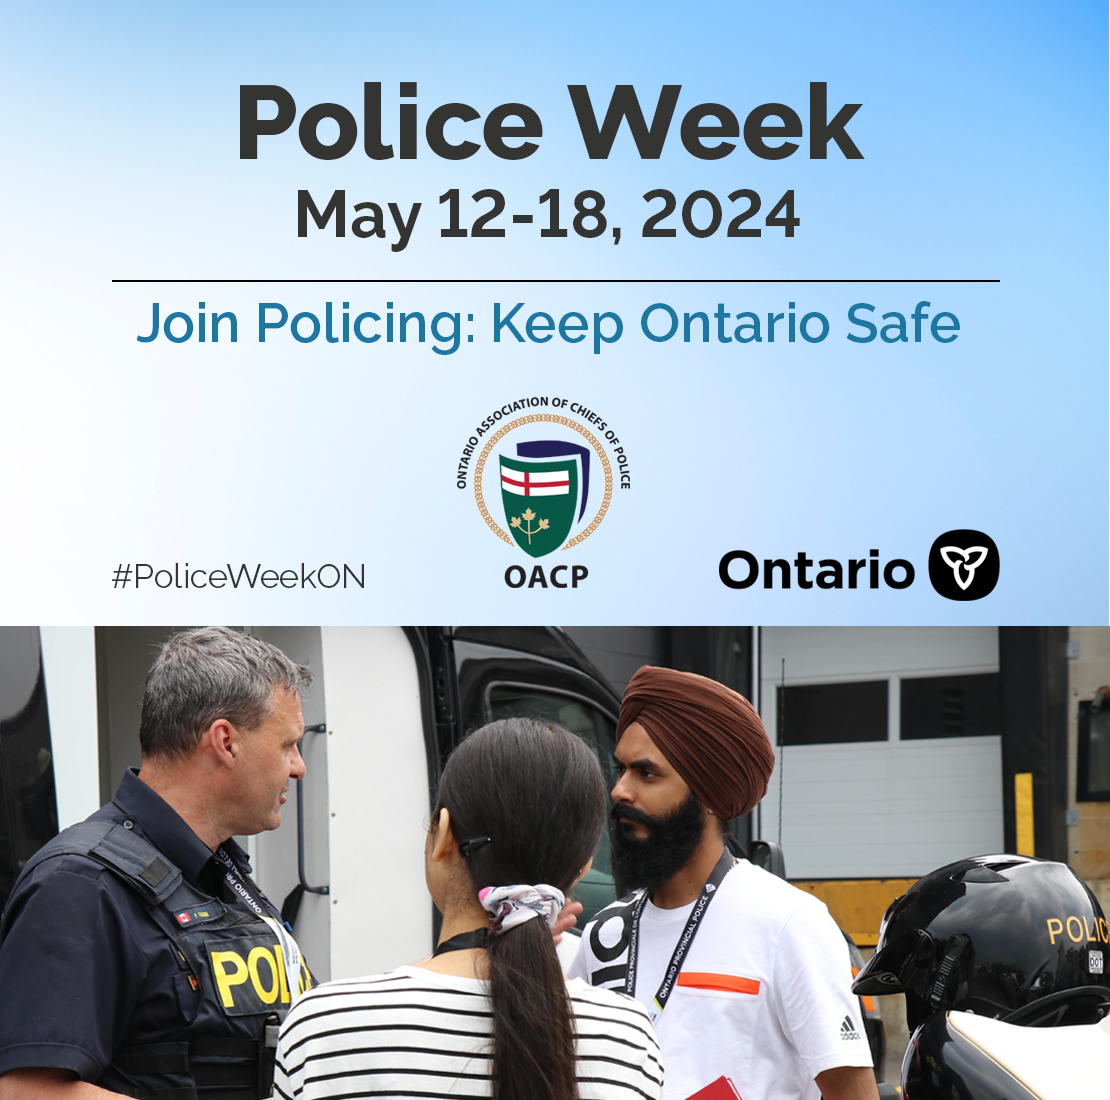 A promotional poster for police week